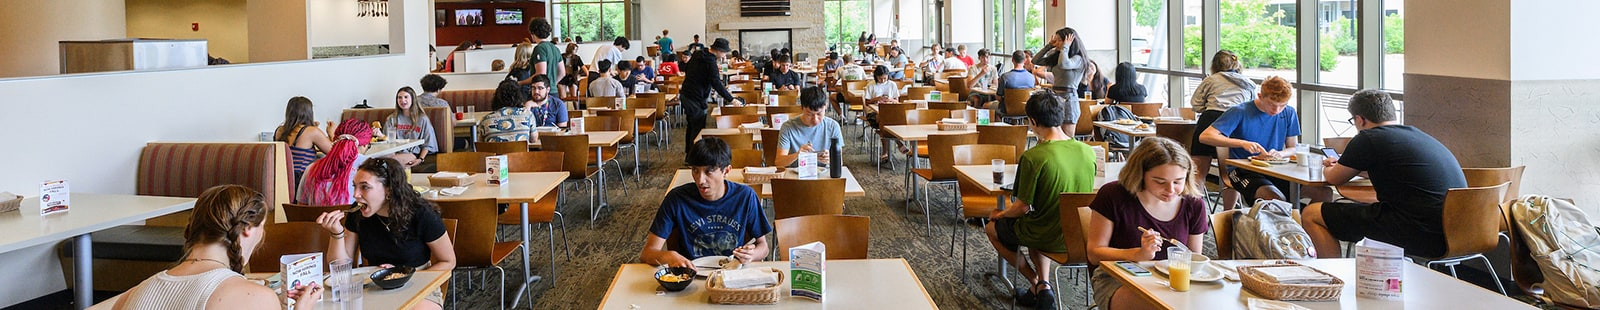 Students eating lunch in a brightly lit dining hall.